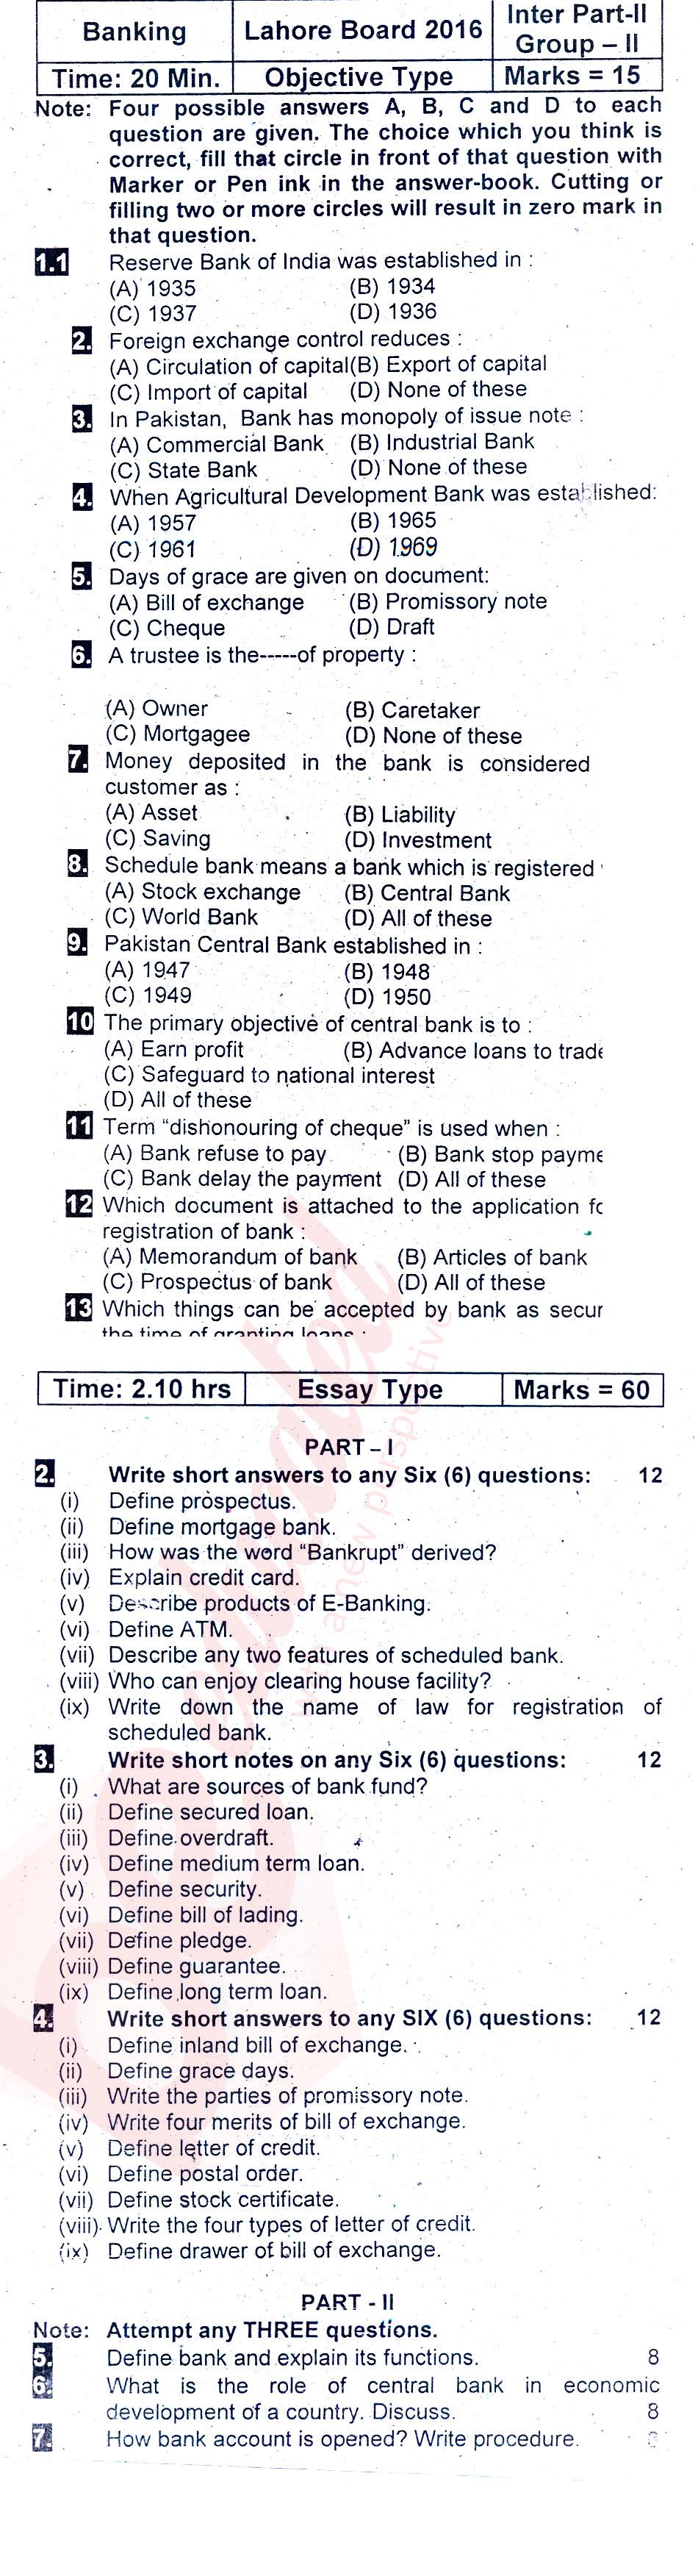 Principles of Banking ICOM Part 2 Past Paper Group 2 BISE Lahore 2016